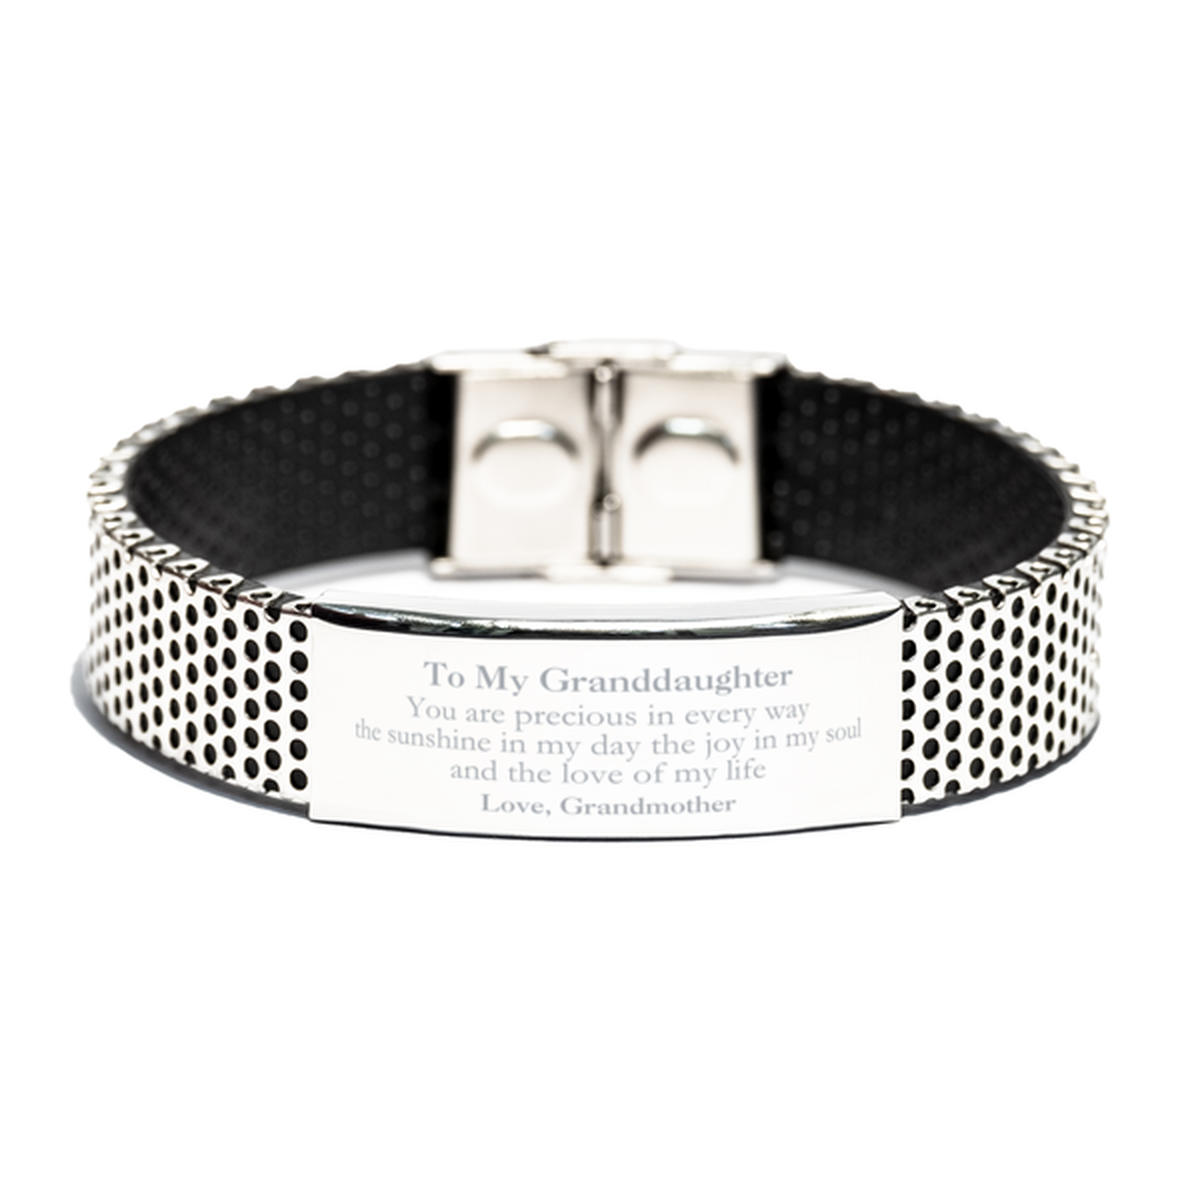 Graduation Gifts for Granddaughter Stainless Steel Bracelet Present from Grandmother, Christmas Granddaughter Birthday Gifts Granddaughter You are precious in every way the sunshine in my day. Love, Grandmother